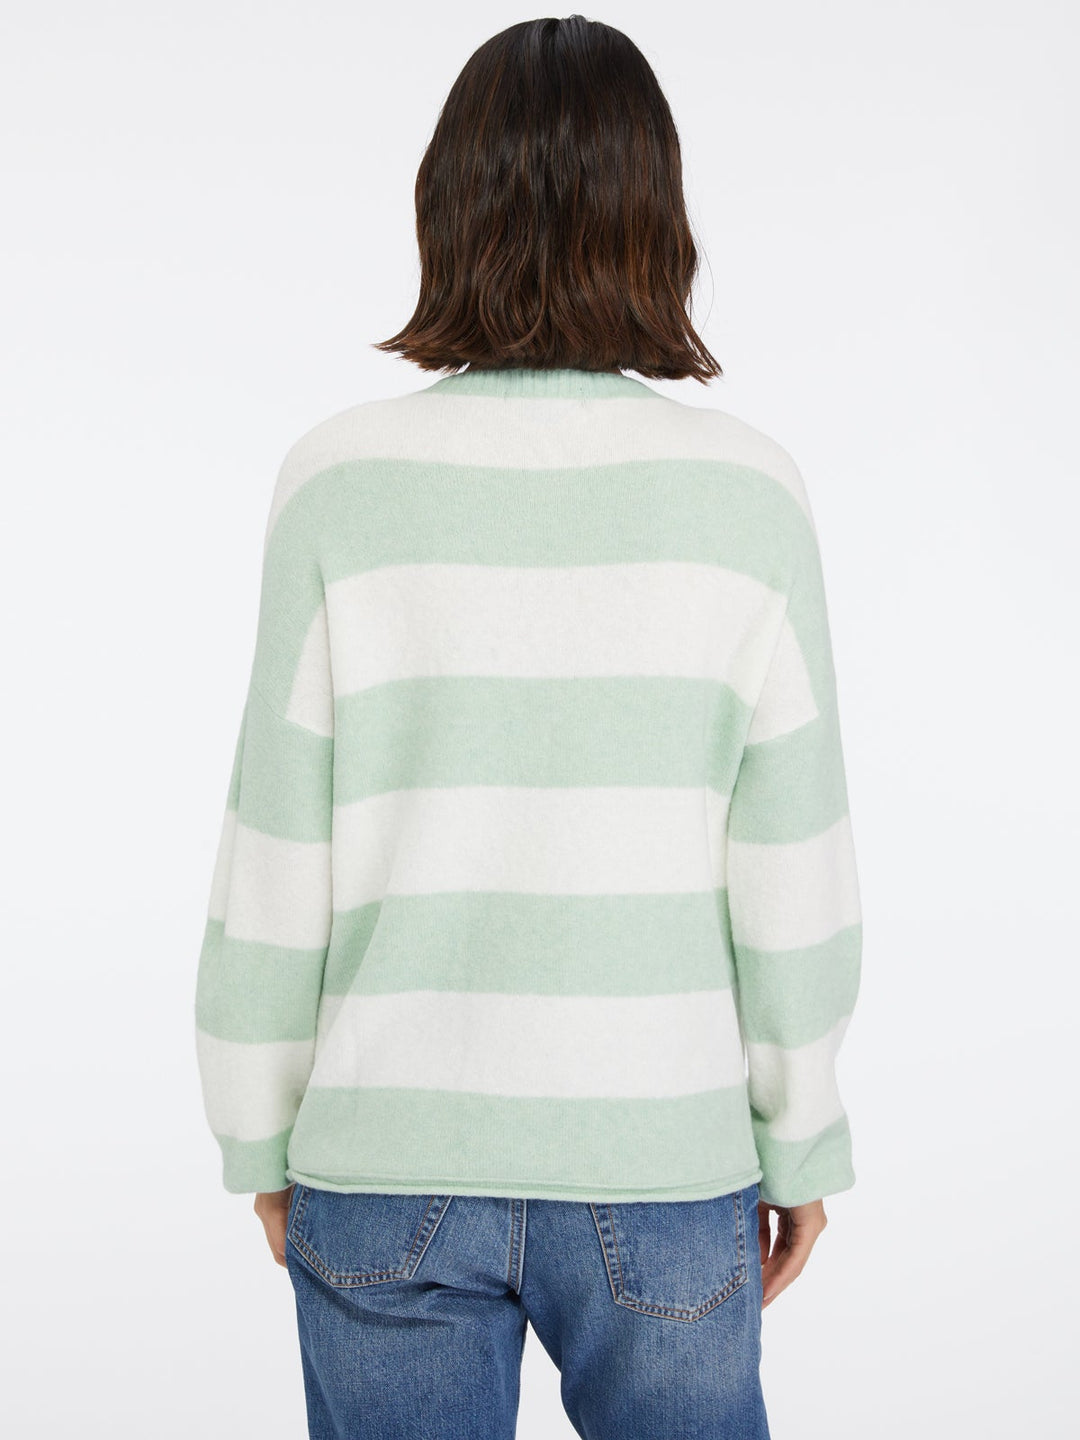 GREEN STRIPE EYE ON YOU SWEATER - Kingfisher Road - Online Boutique